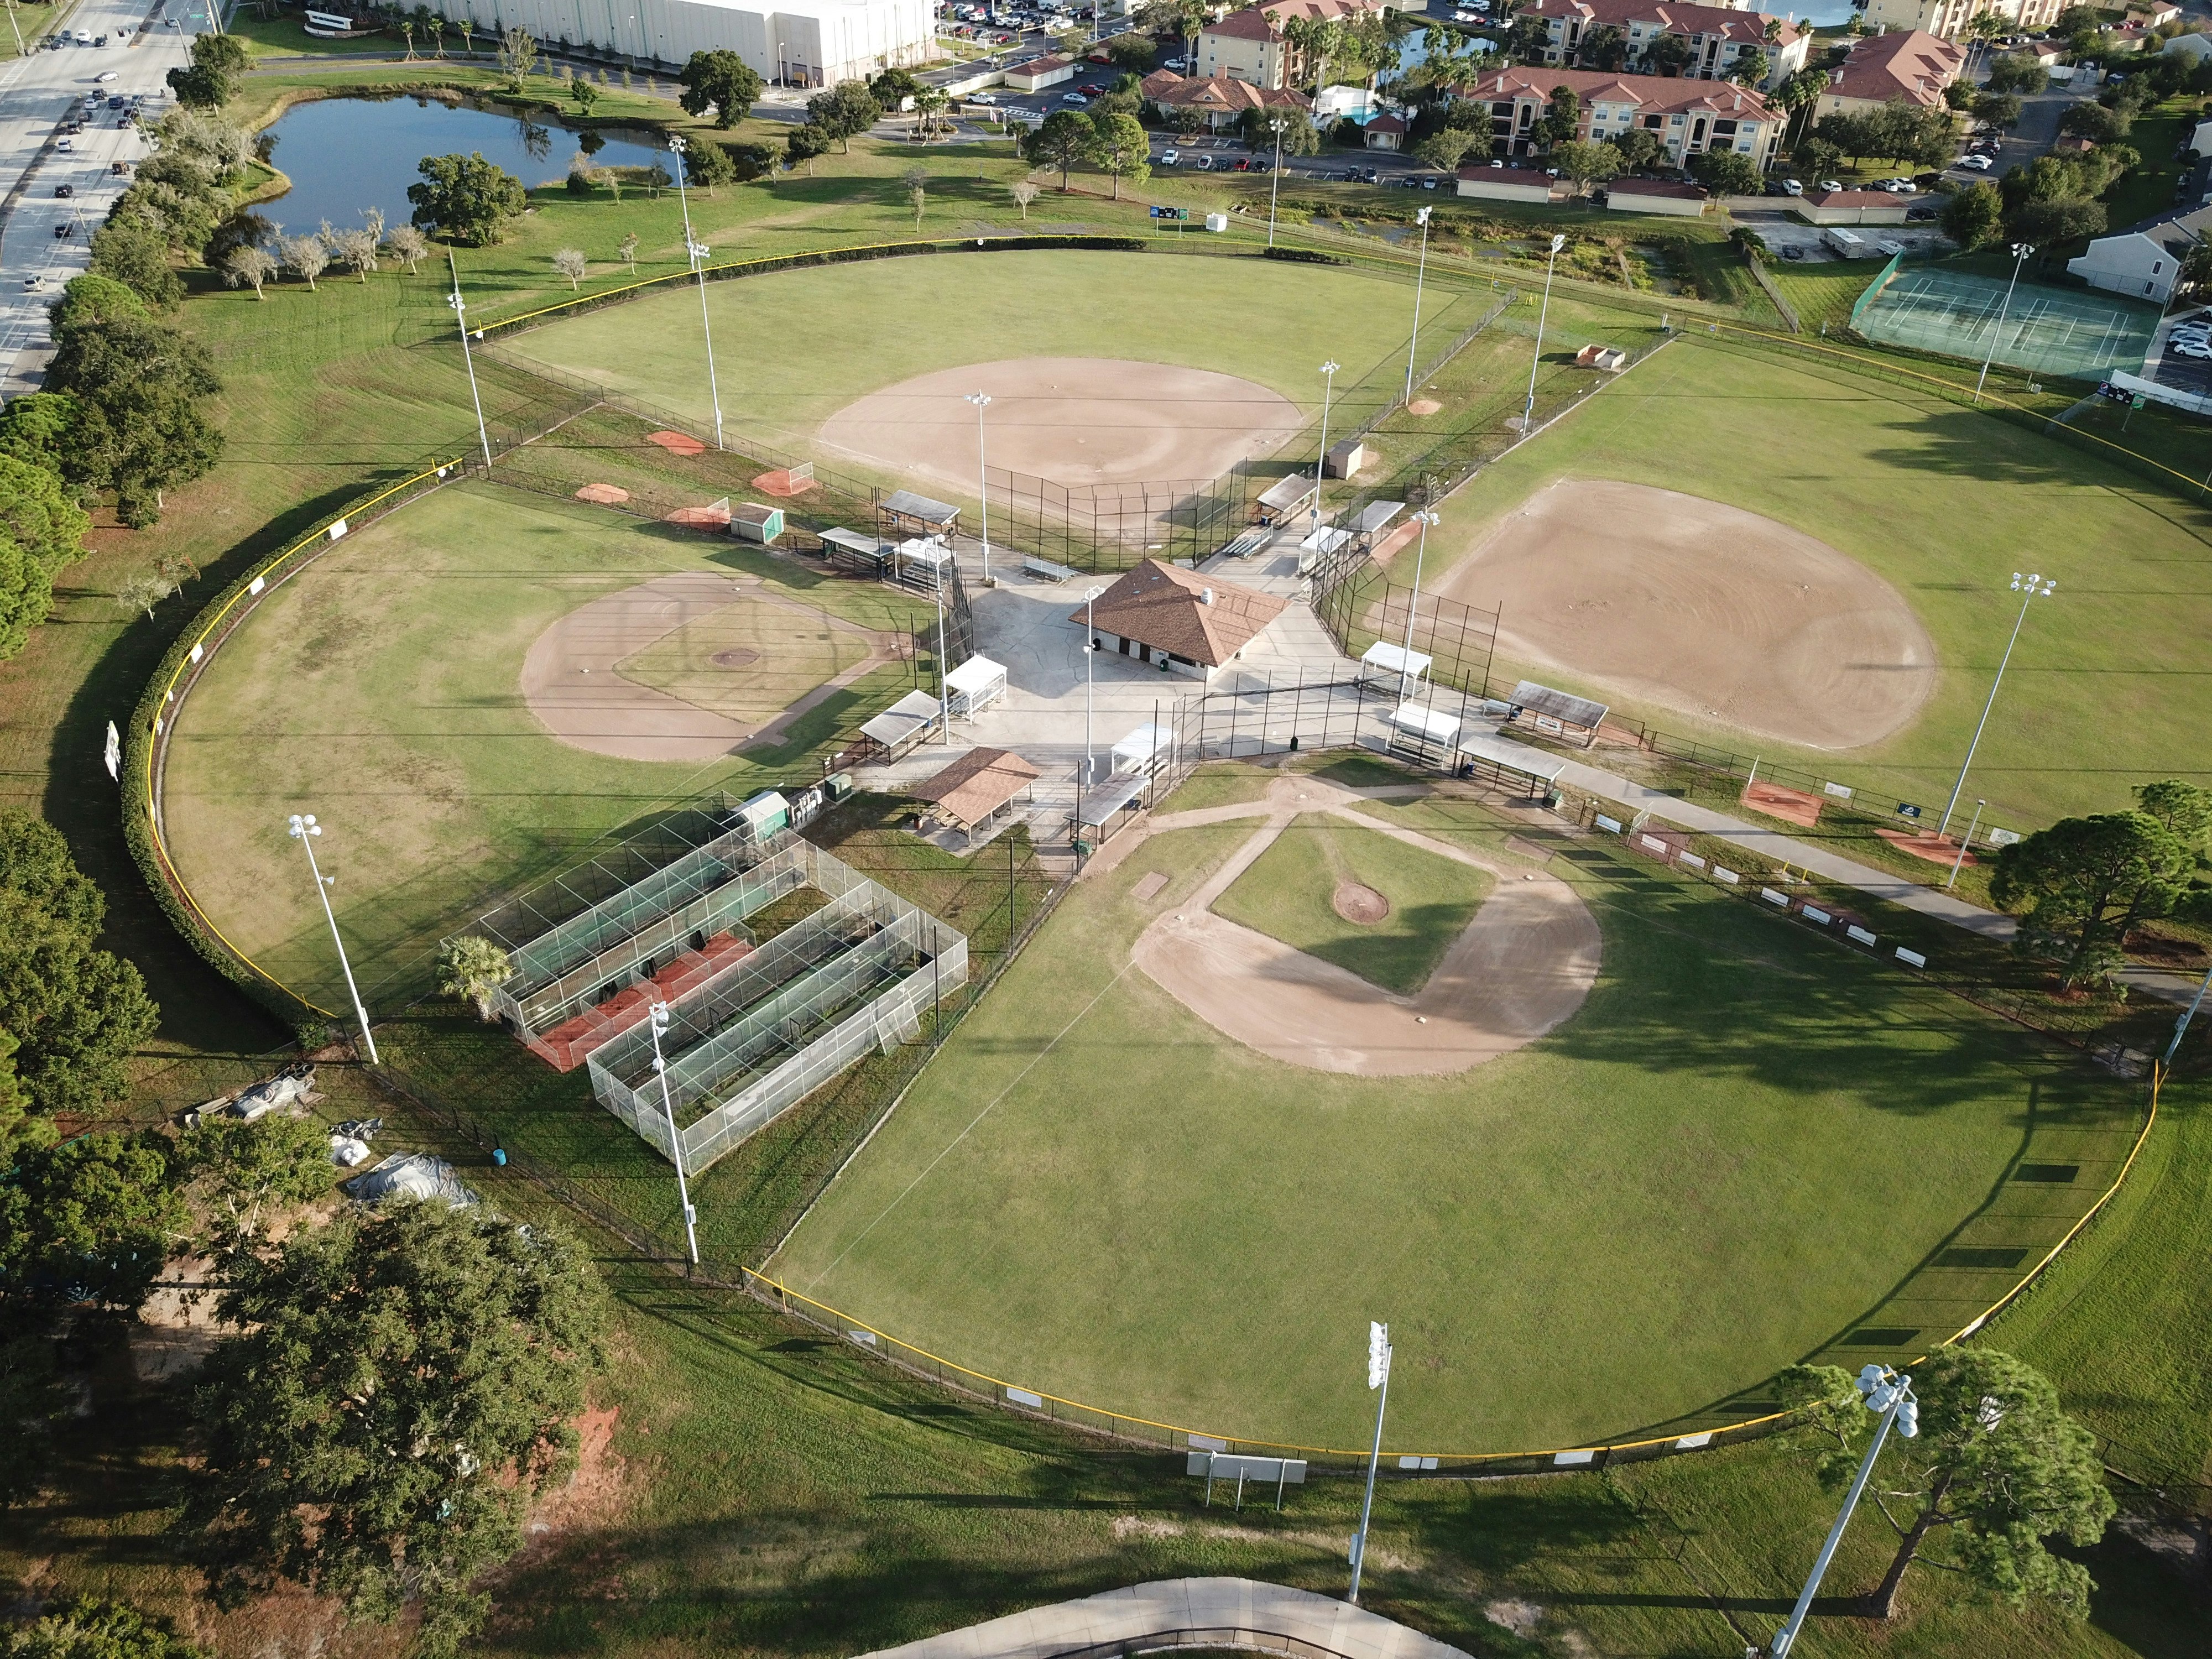 Aerial Drone Photography by Anita Denunzio a photo of Oldsmar Sports Complex, Oldsmar in Tampa Bay, Florida.